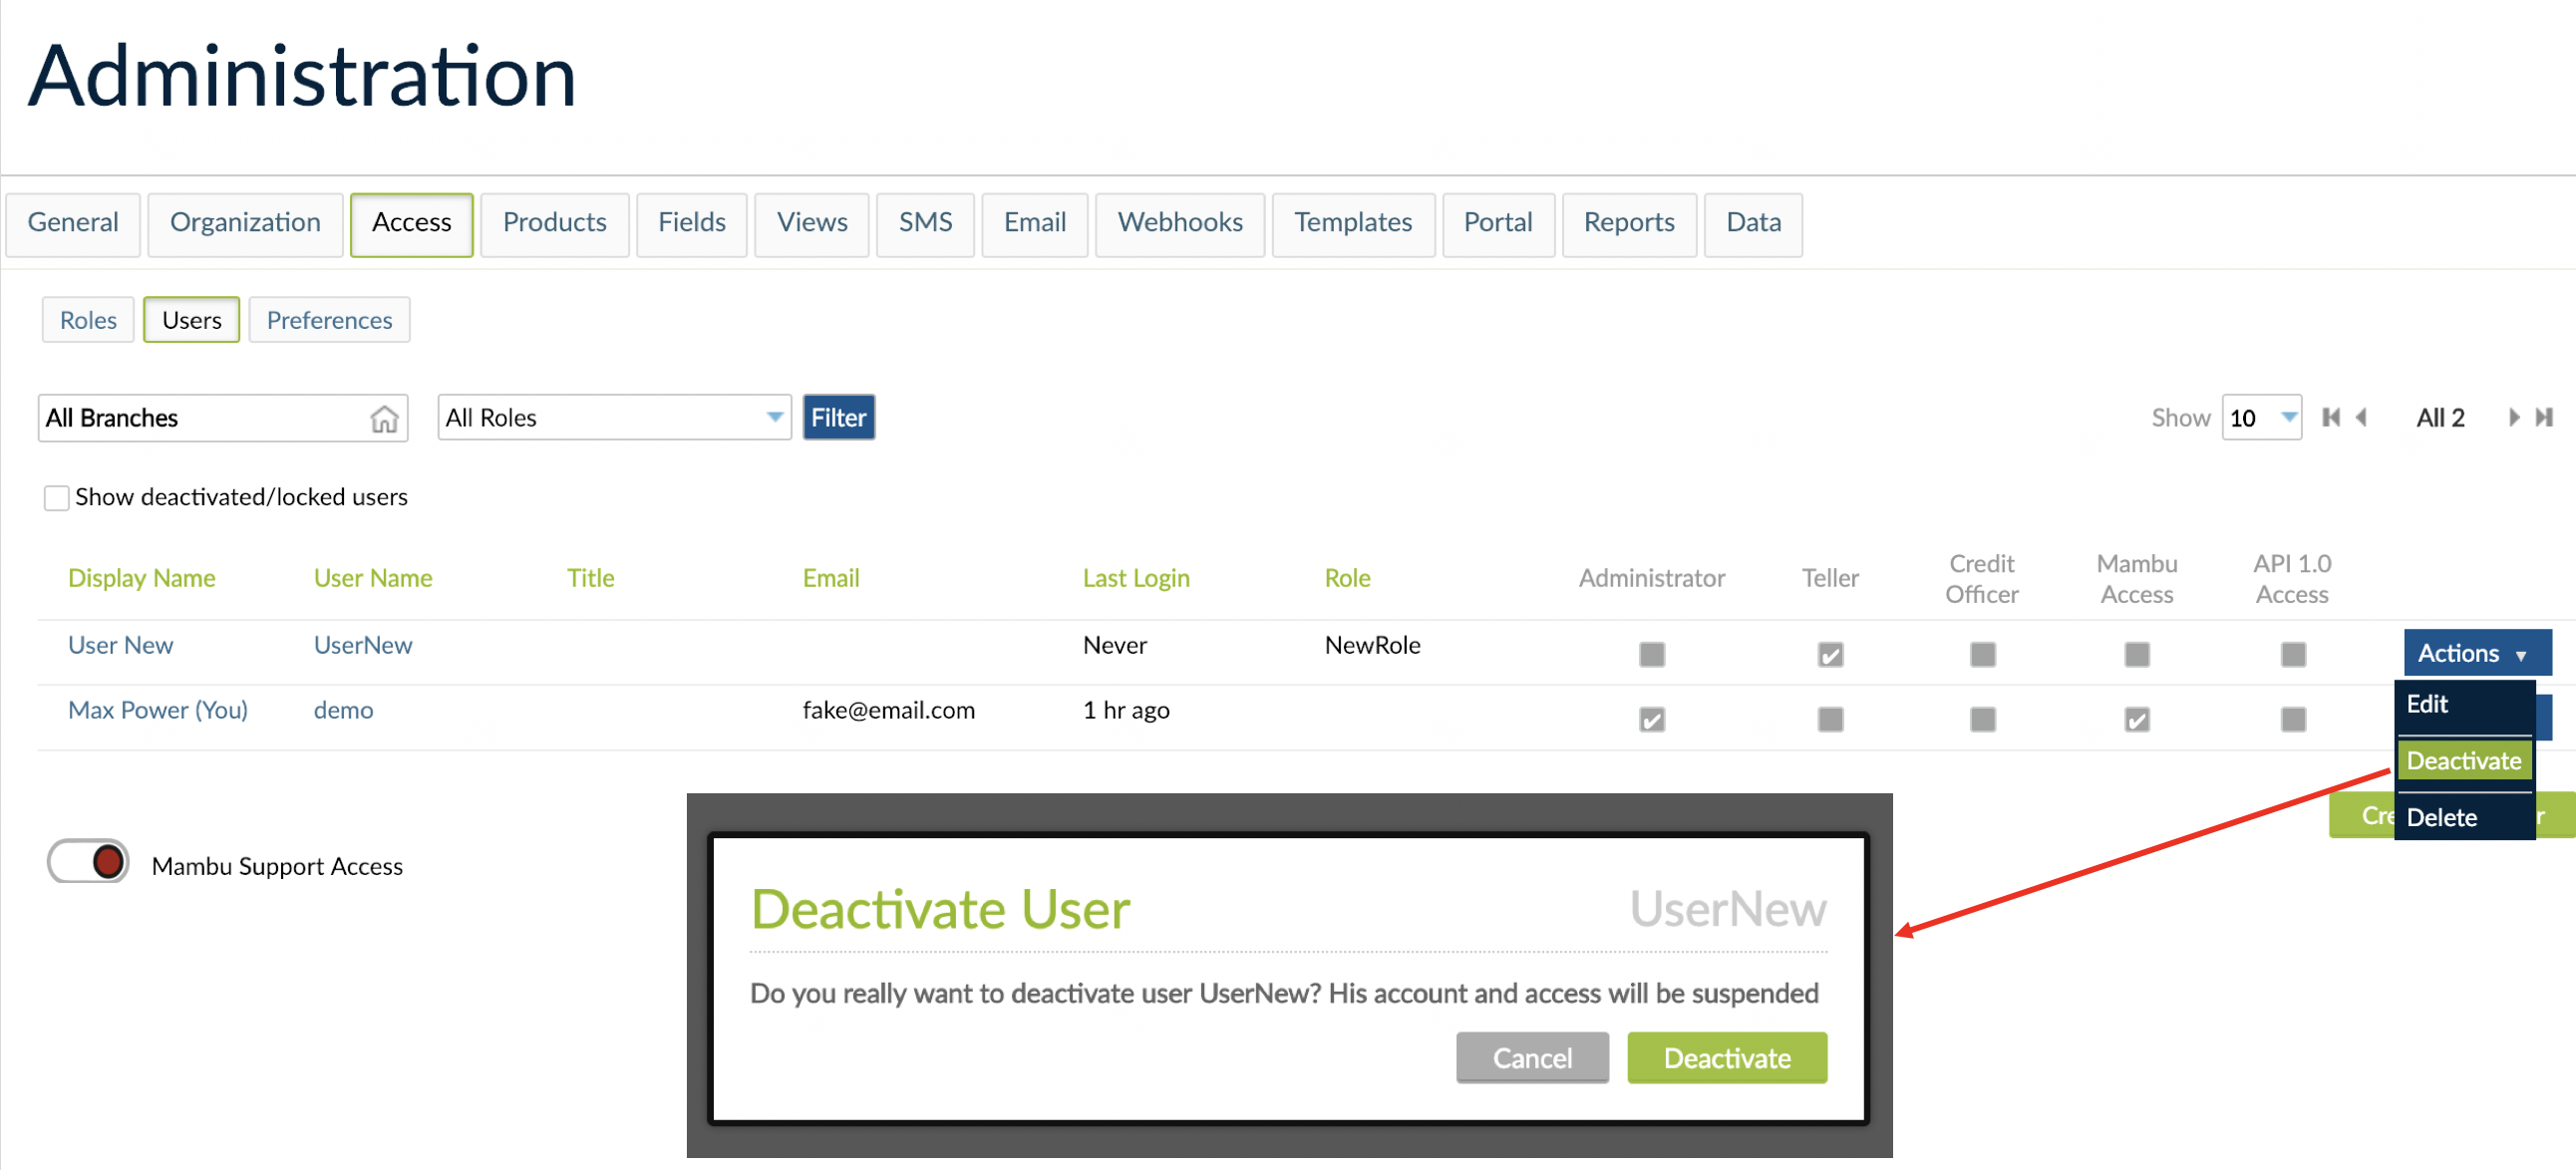 User deactivation and the related pop-up that is displayed